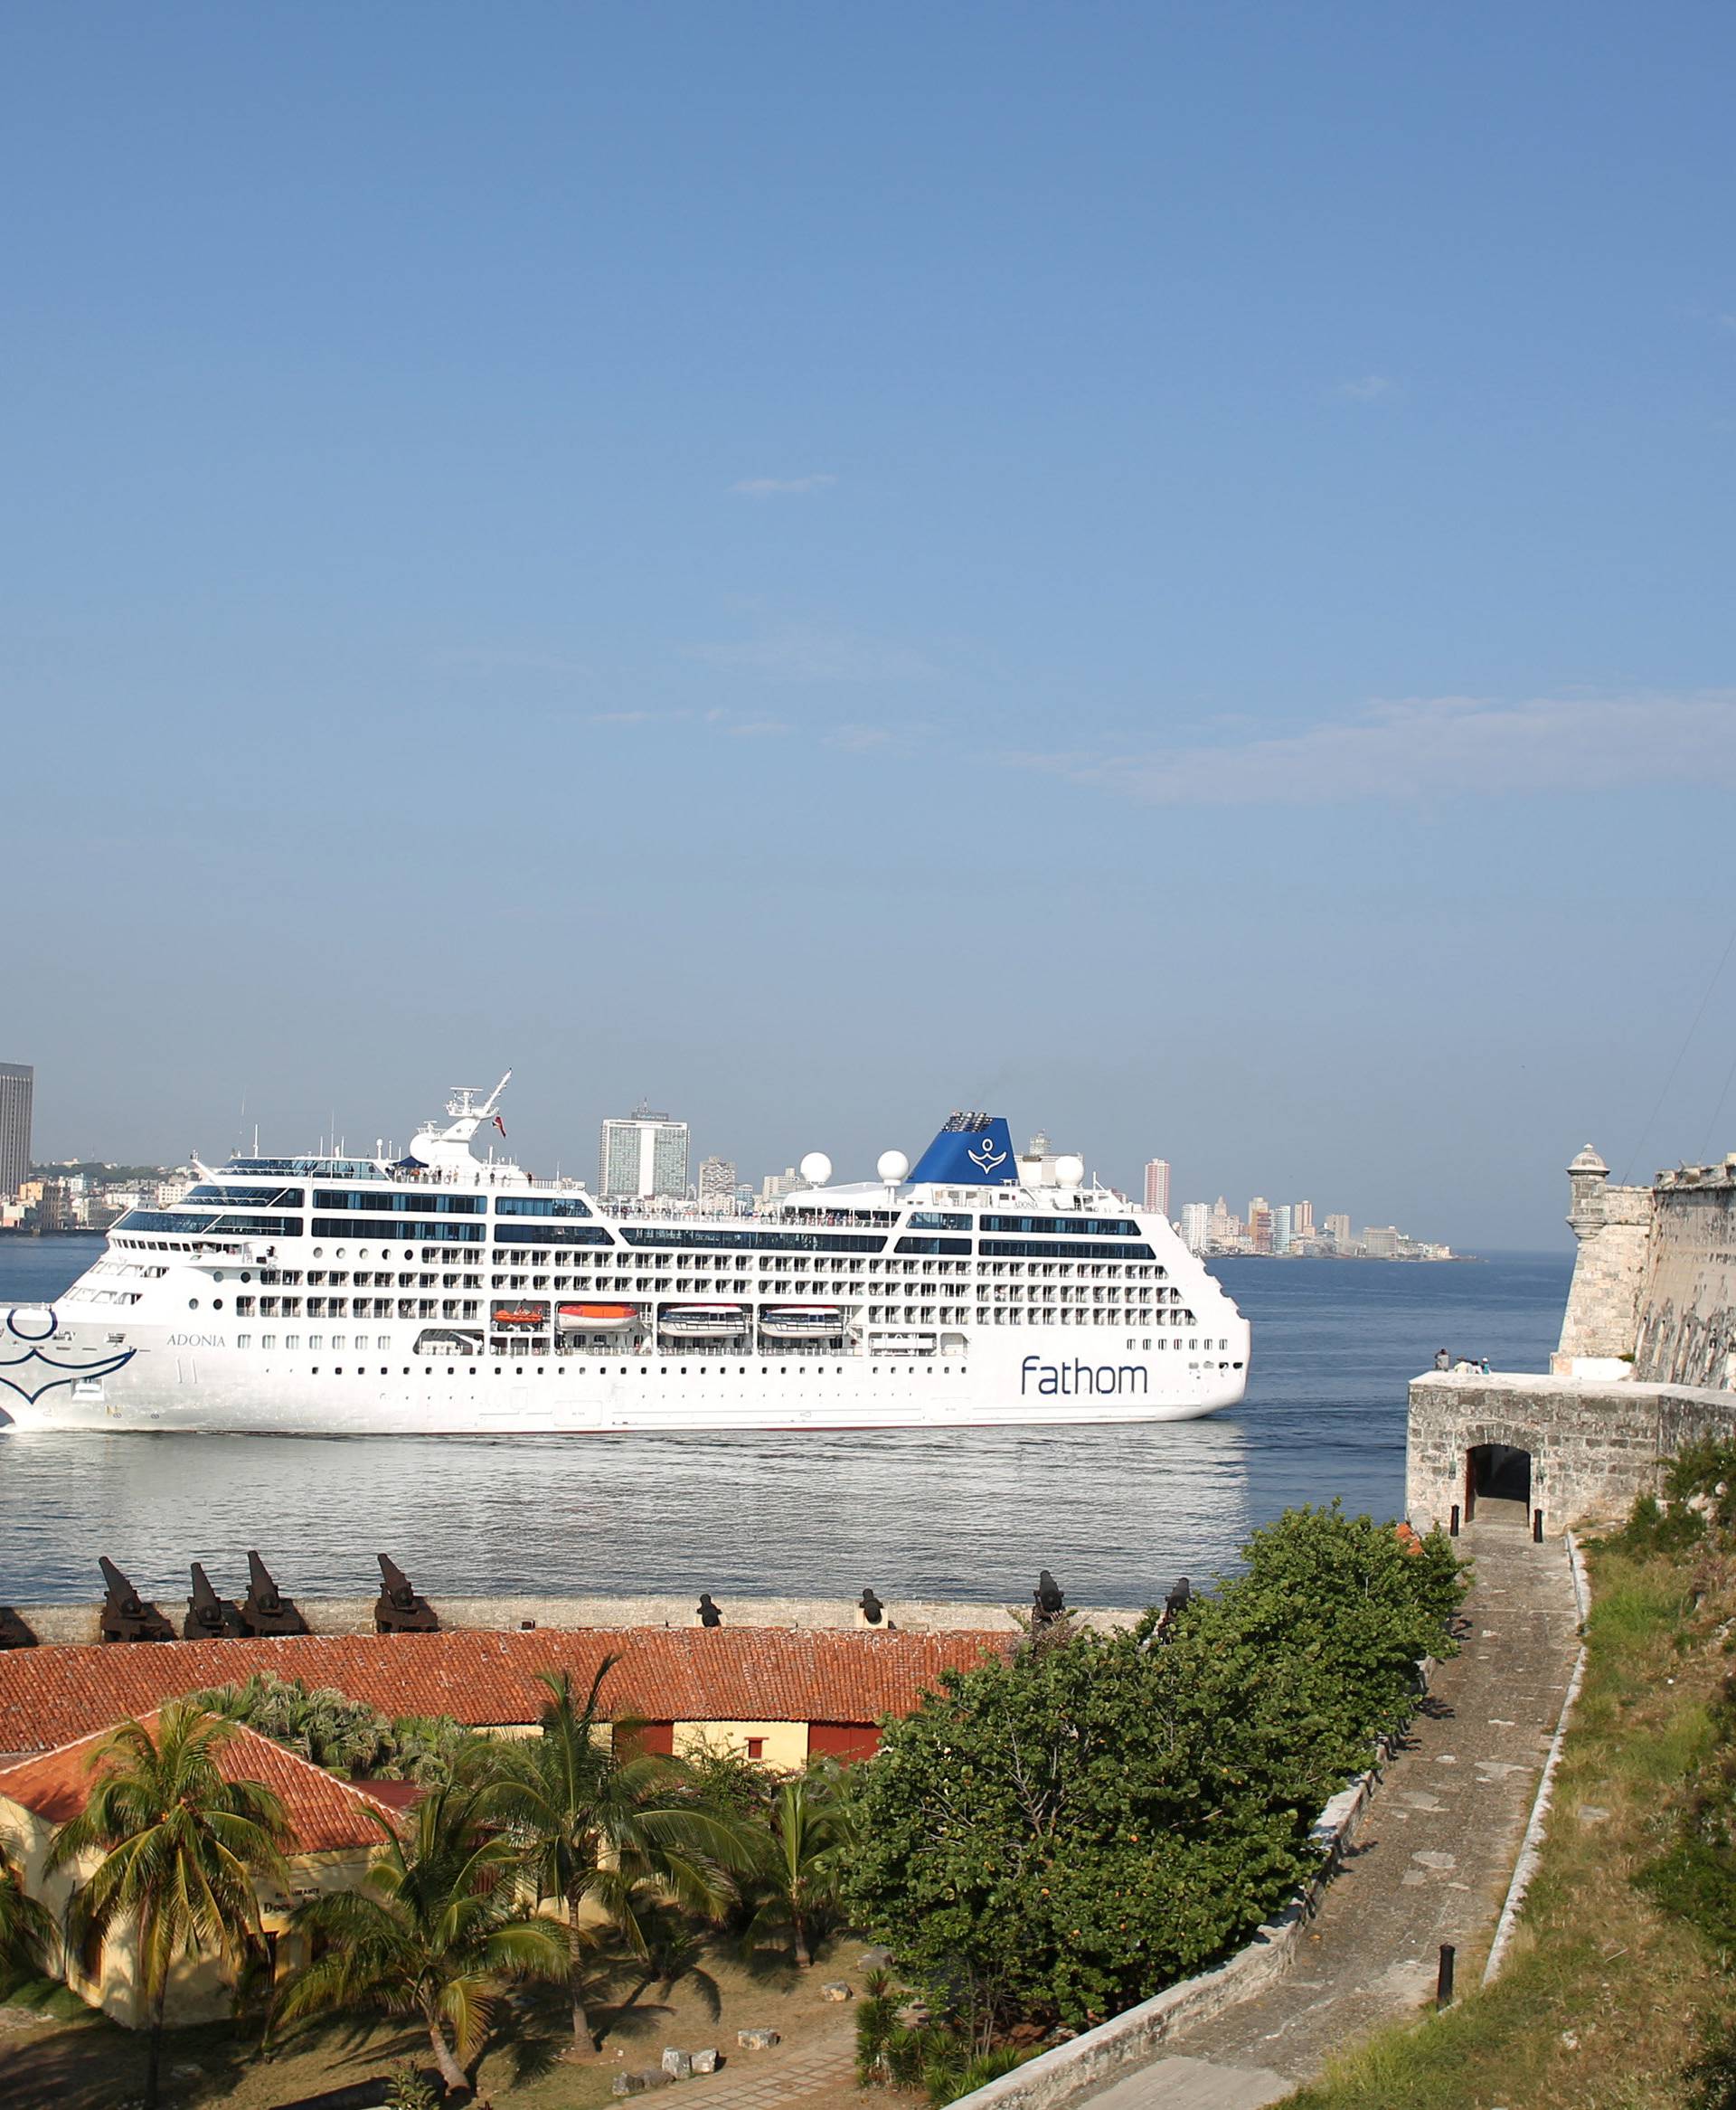 U.S. Carnival cruise ship Adonia arrives at the Havana bay, the first cruise liner to sail between the United States and Cuba since Cuba's 1959 revolution, Cuba